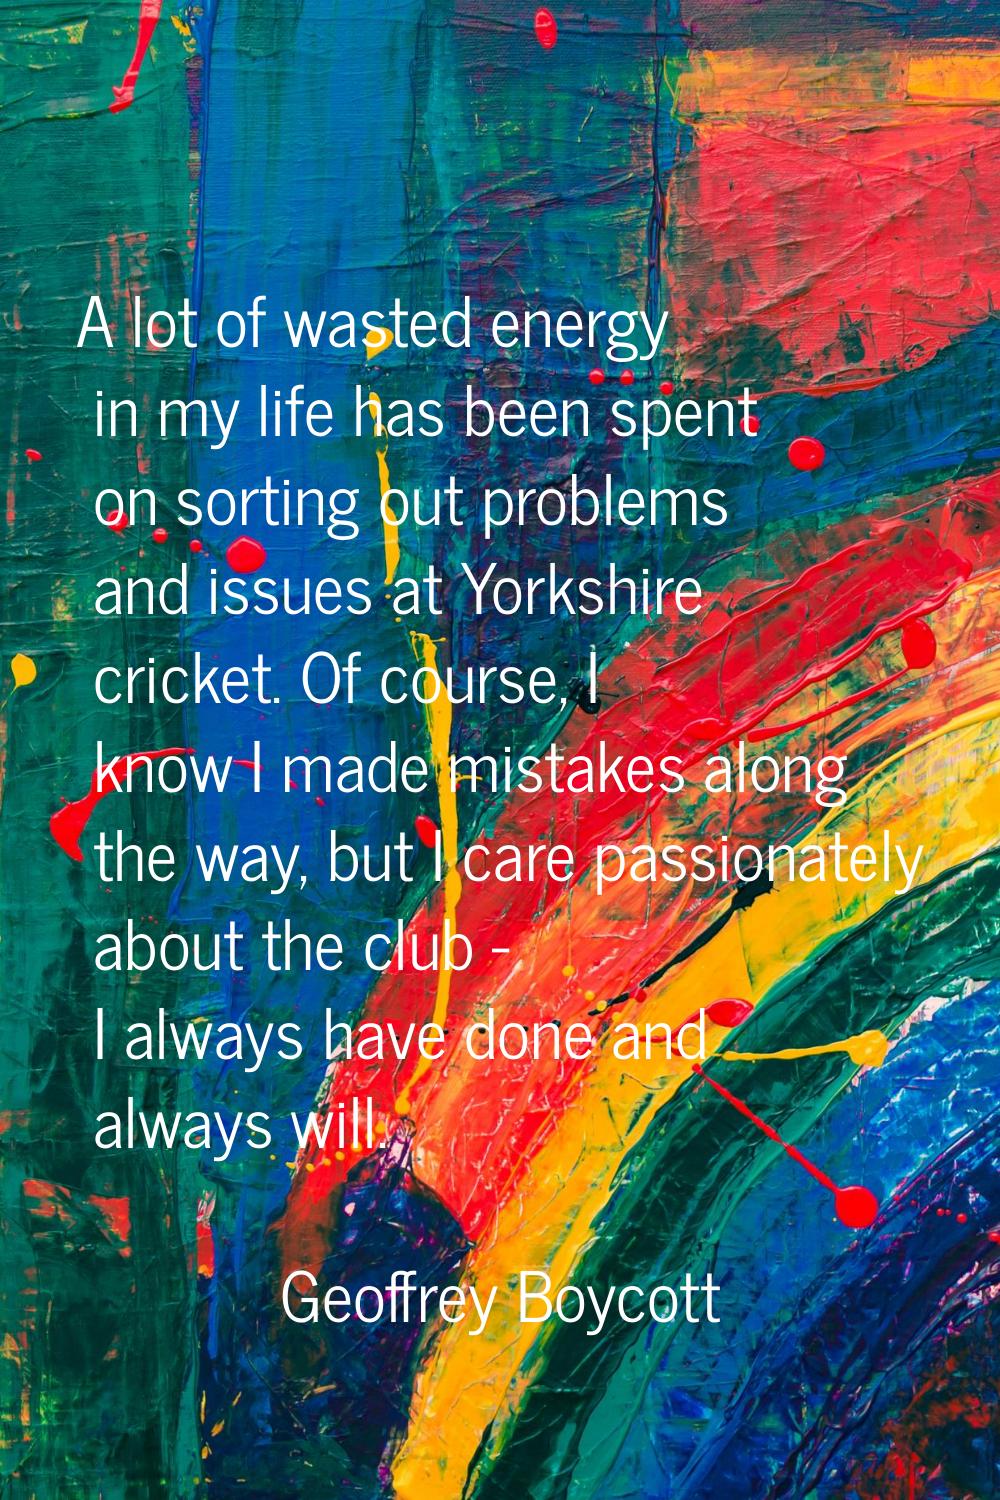 A lot of wasted energy in my life has been spent on sorting out problems and issues at Yorkshire cr